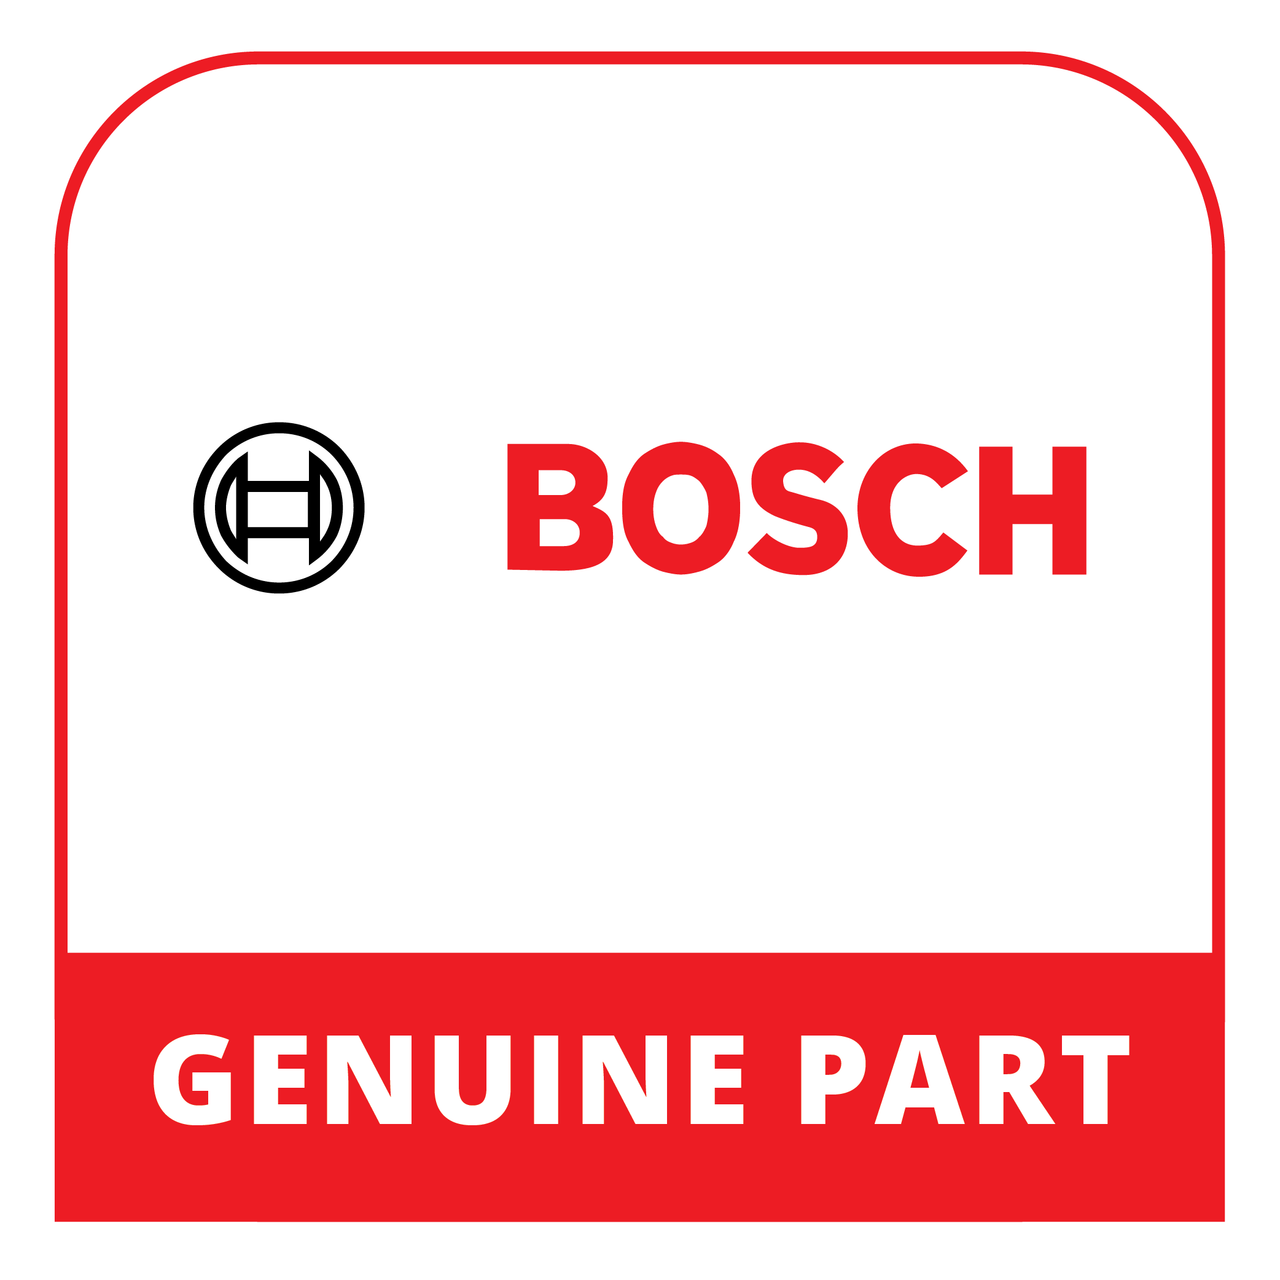 Bosch (Thermador) 20001918 - Support - Genuine Bosch (Thermador) Part